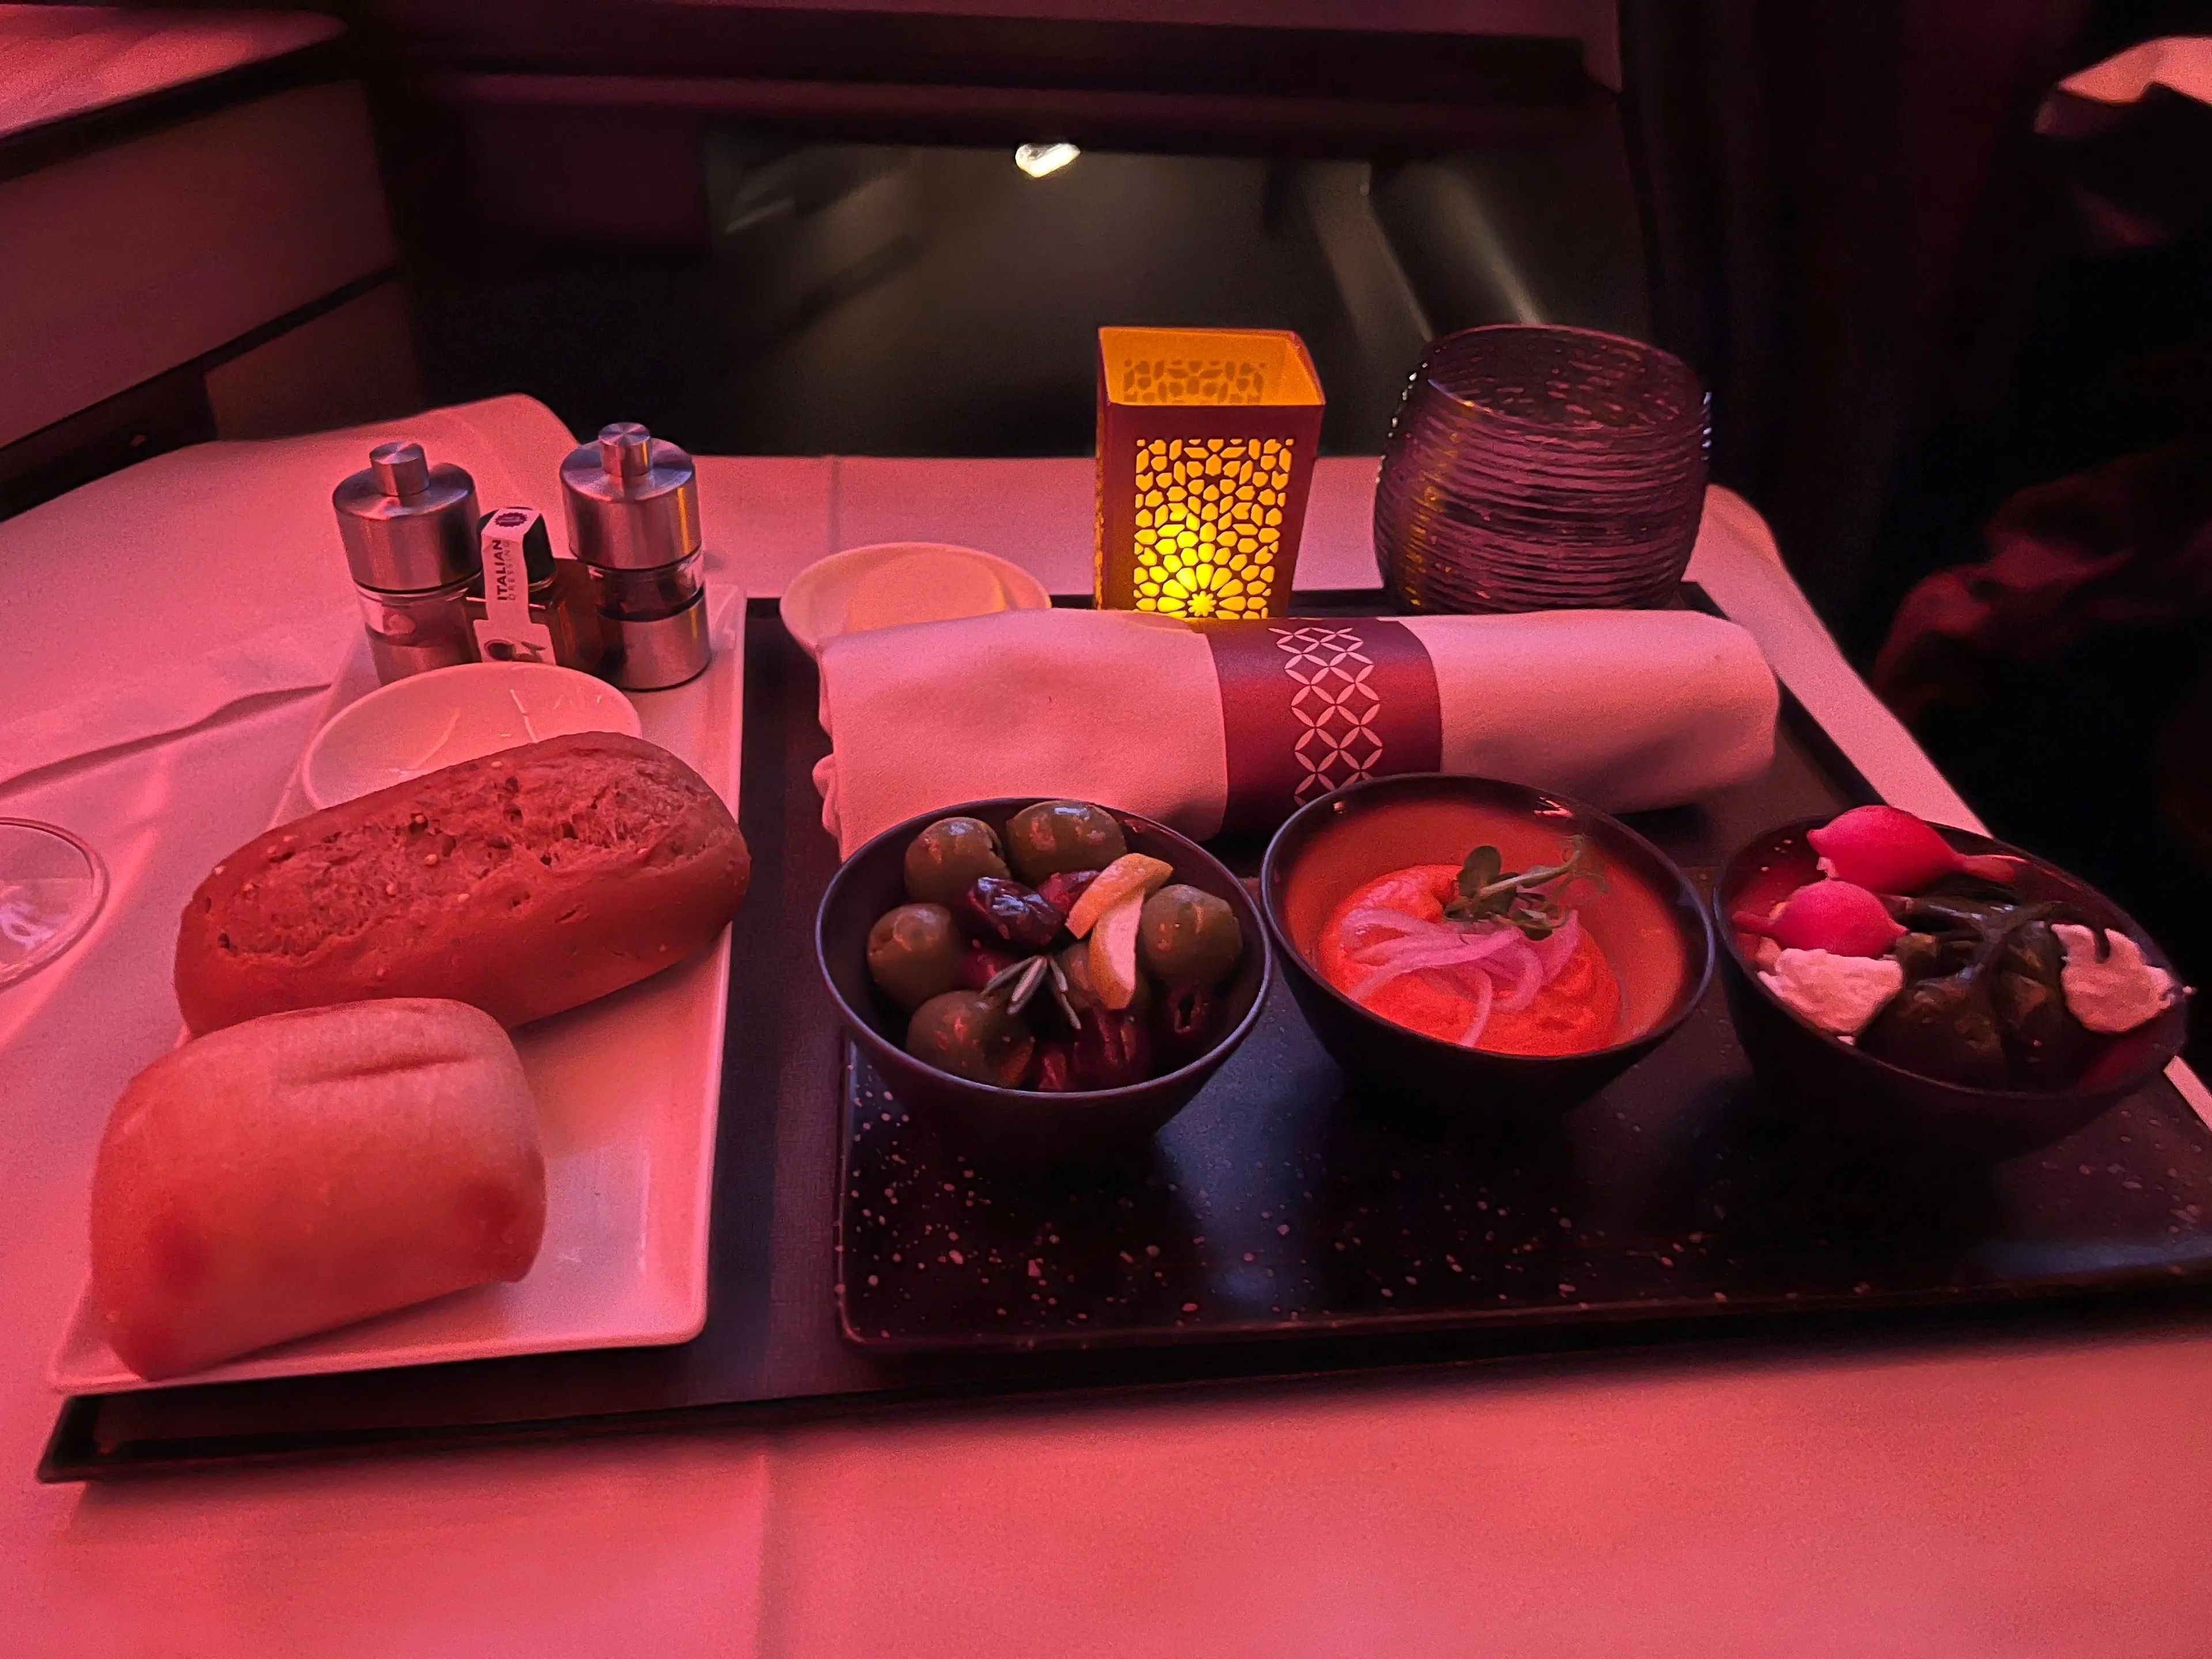 One of the appetizers offered on board.